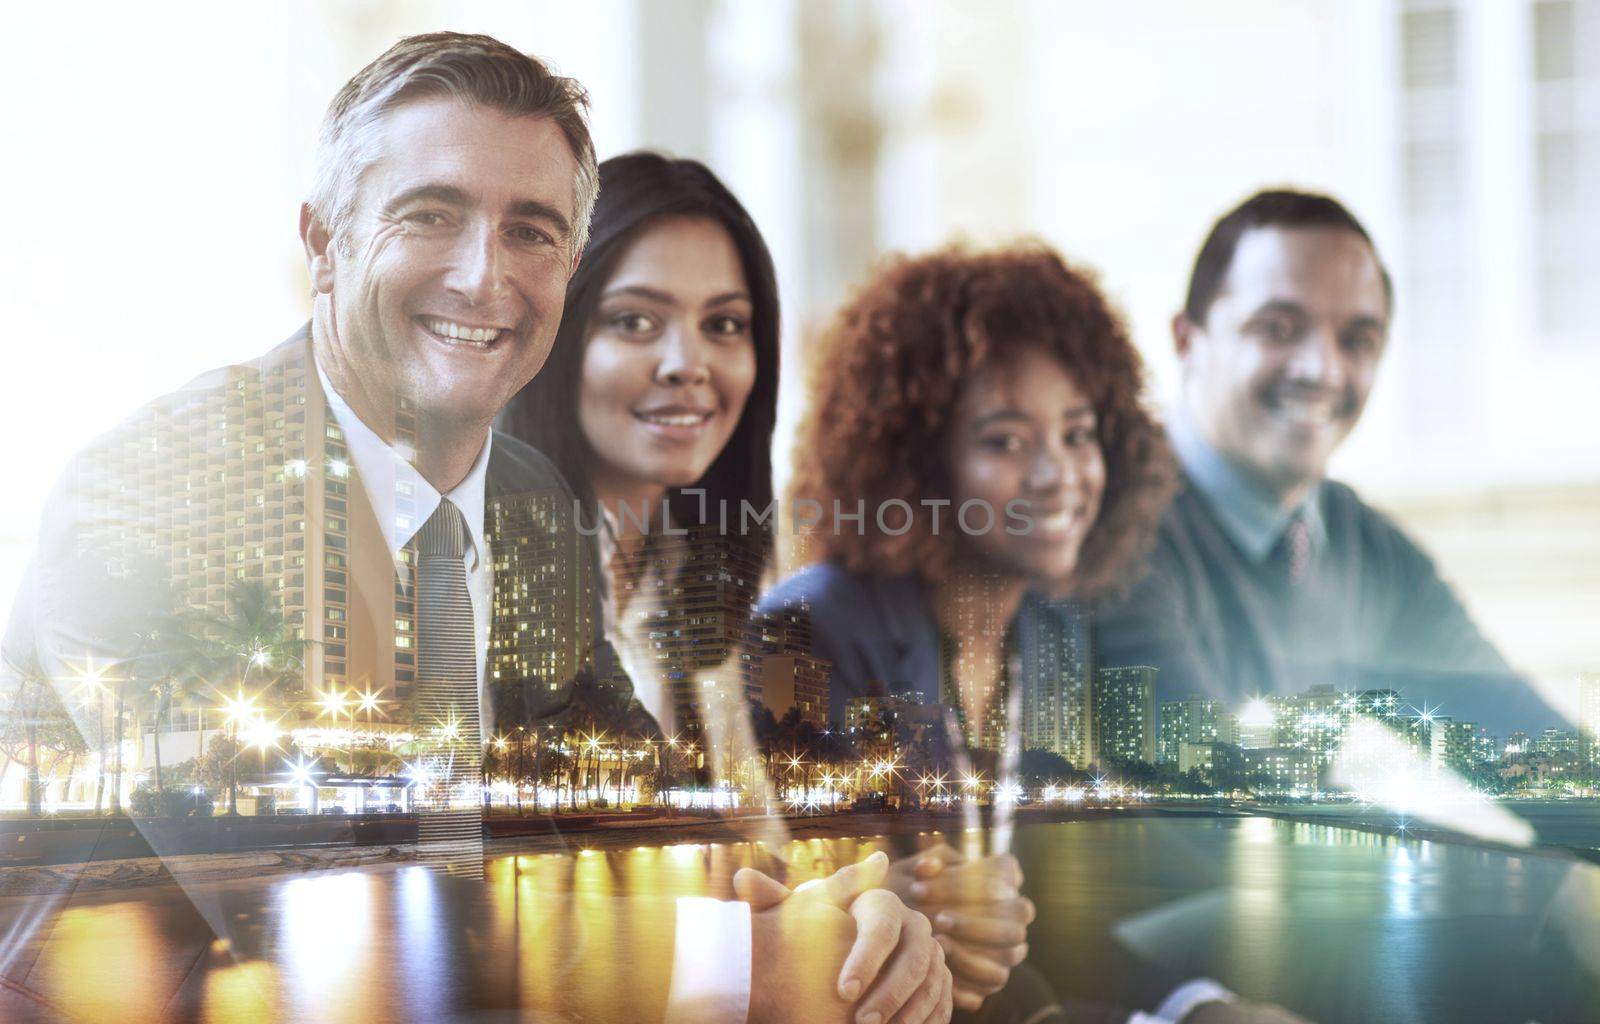 The faces of new business. Multiple exposure shot of businesspeople superimposed over a cityscape